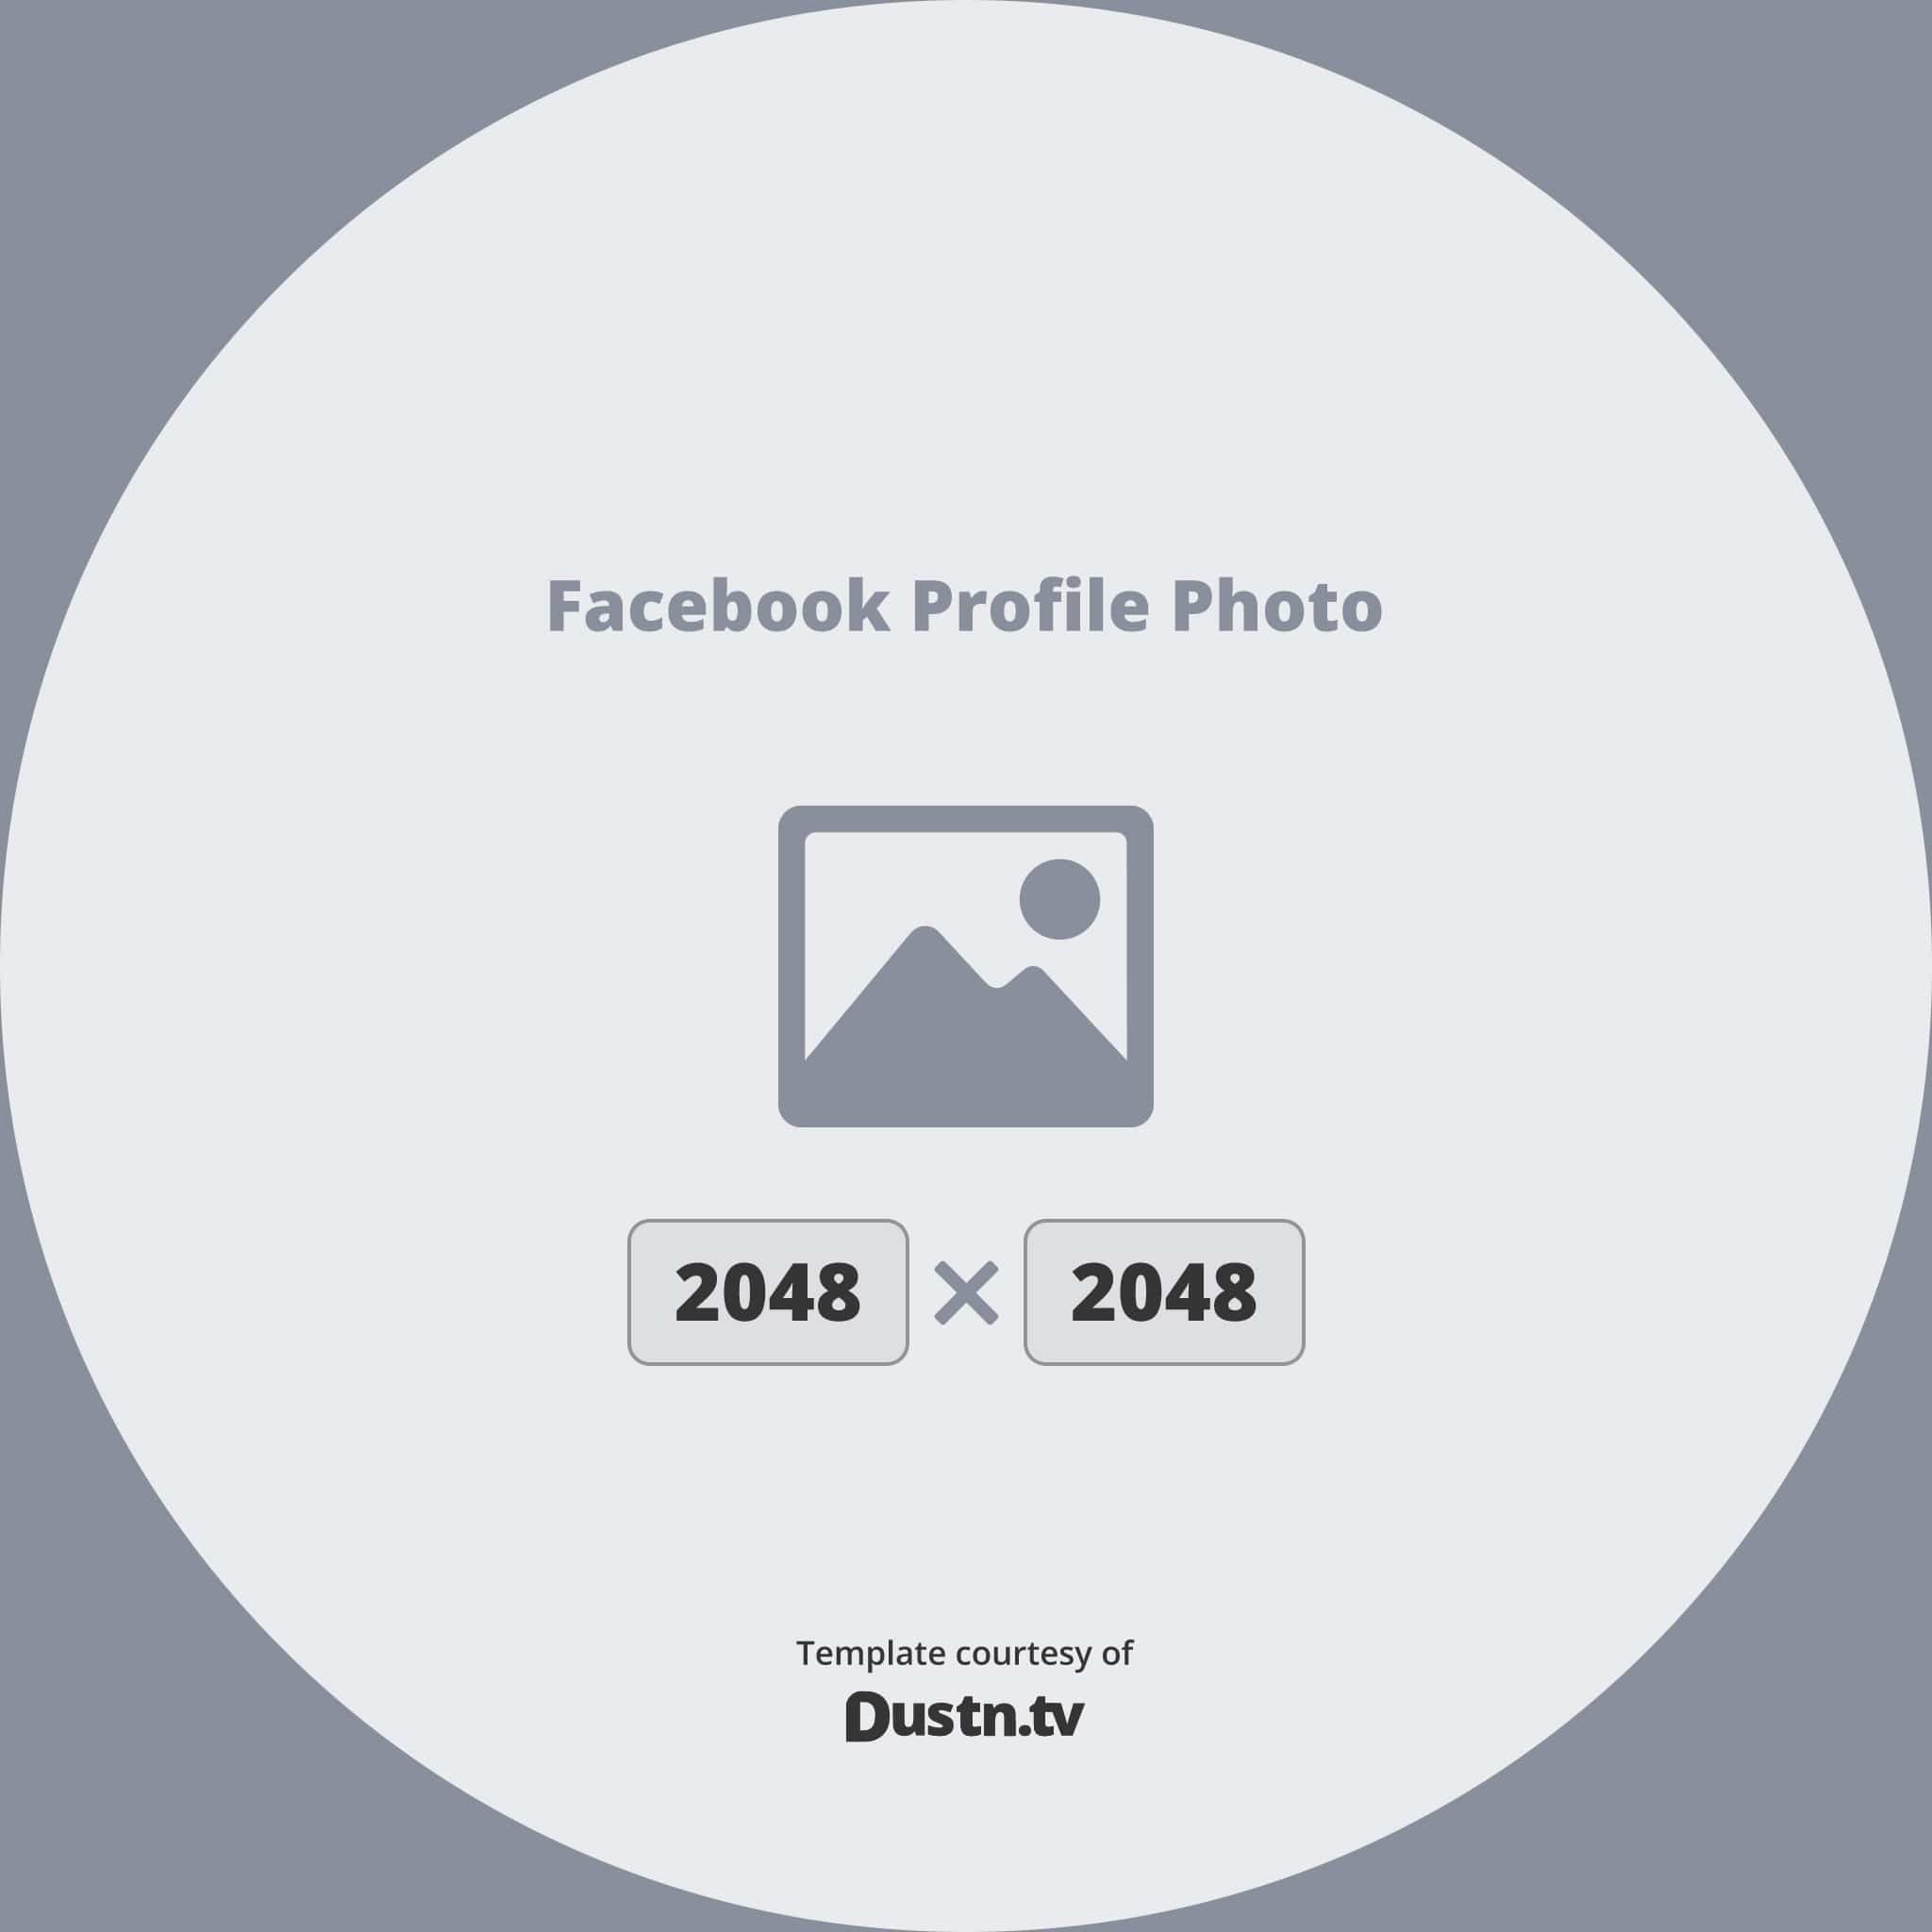 Size Logo - Facebook Image Sizes & Dimensions 2019: Everything You Need to Know